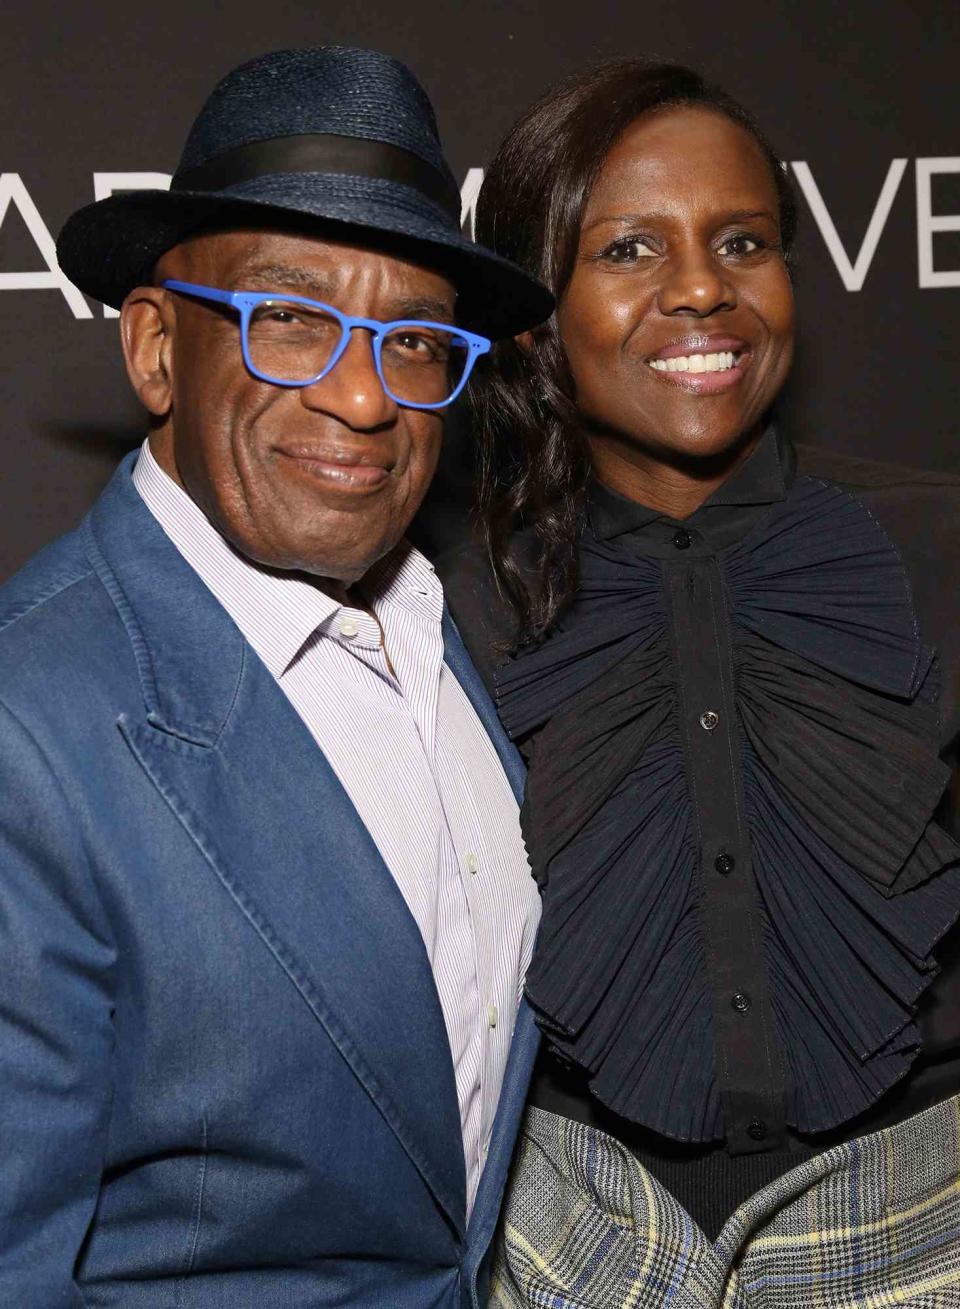 Al Roker and Deborah Roberts attend the Broadway Opening Night Arrivals for "Burn This" at the Hudson Theatre on April 15, 2019 in New York City